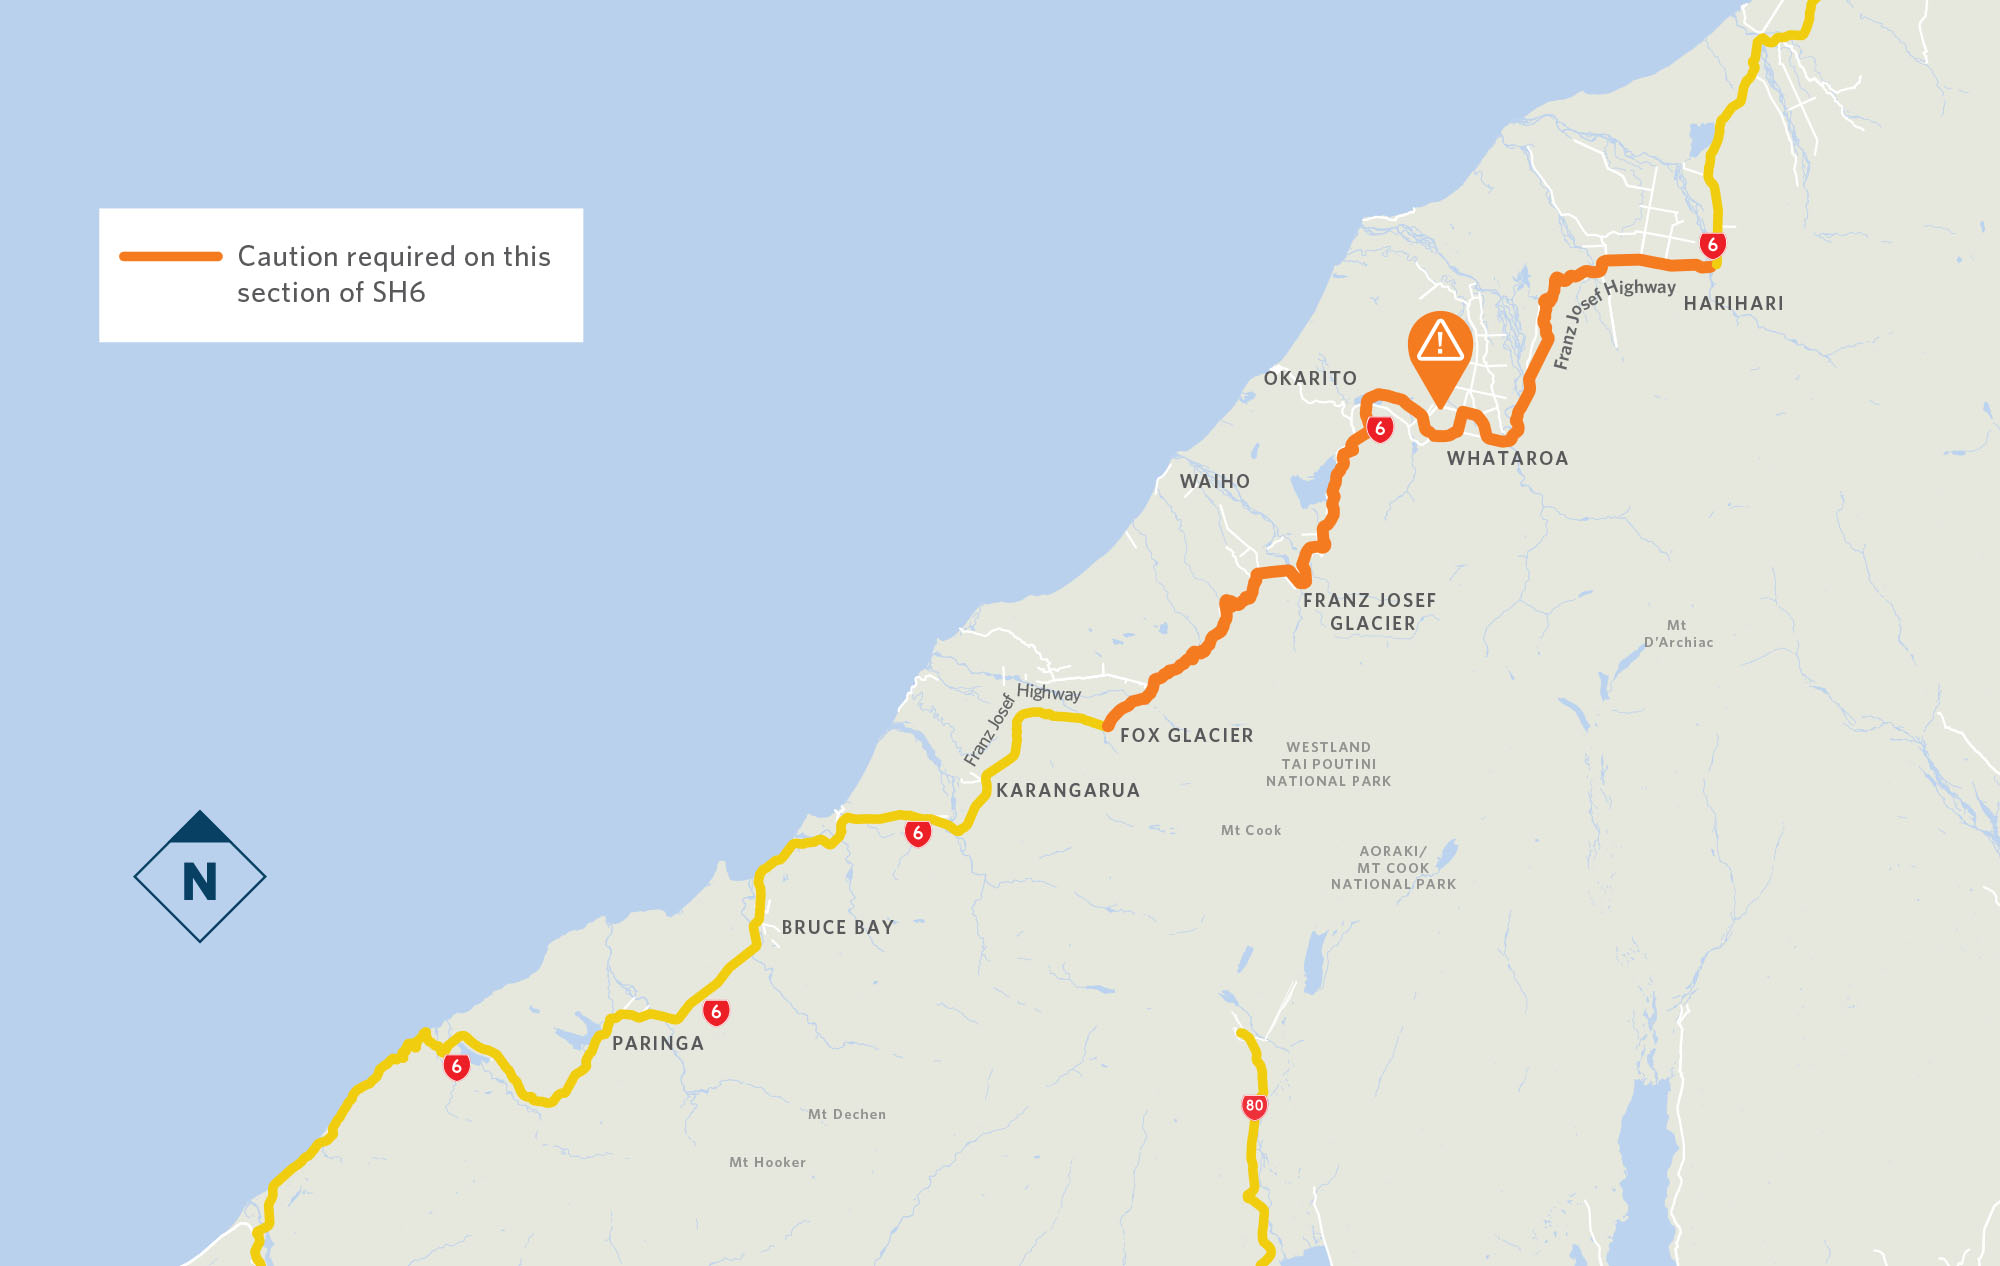 Illustrated map showing the West Coast area affected by the storm in December 2019. The north section between Whataroa and Harihari is closed. The road between Fox Glacier and Frans Josef Glacier townships is open between daylight hours 8am to 8pm. Caution is required for the rest of State Highway 6 between Haast and Whataroa.